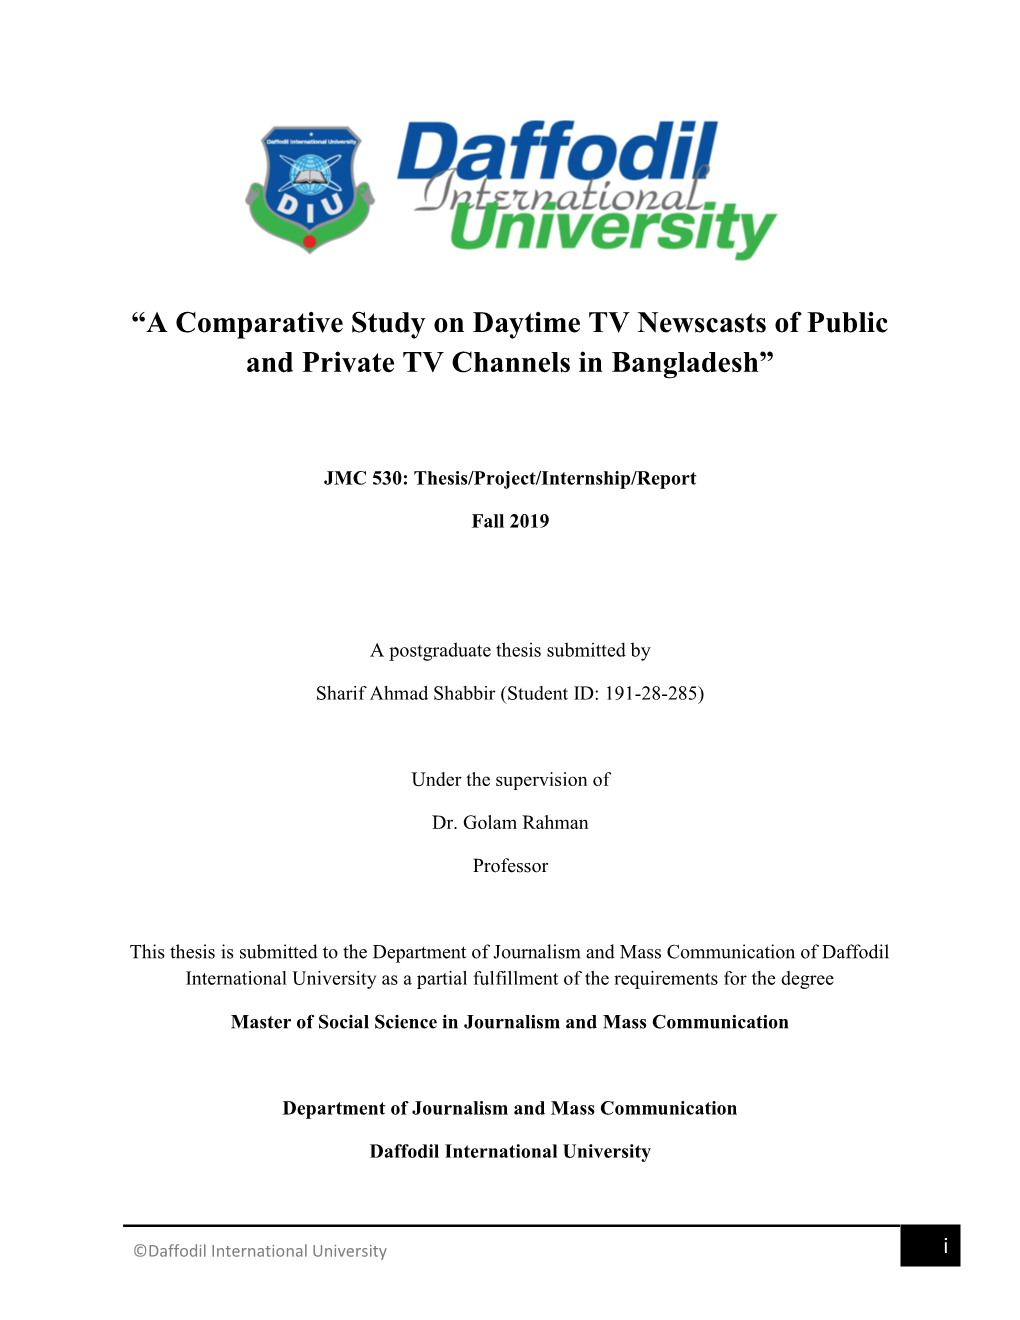 A Comparative Study on Daytime TV Newscasts of Public and Private TV Channels in Bangladesh”